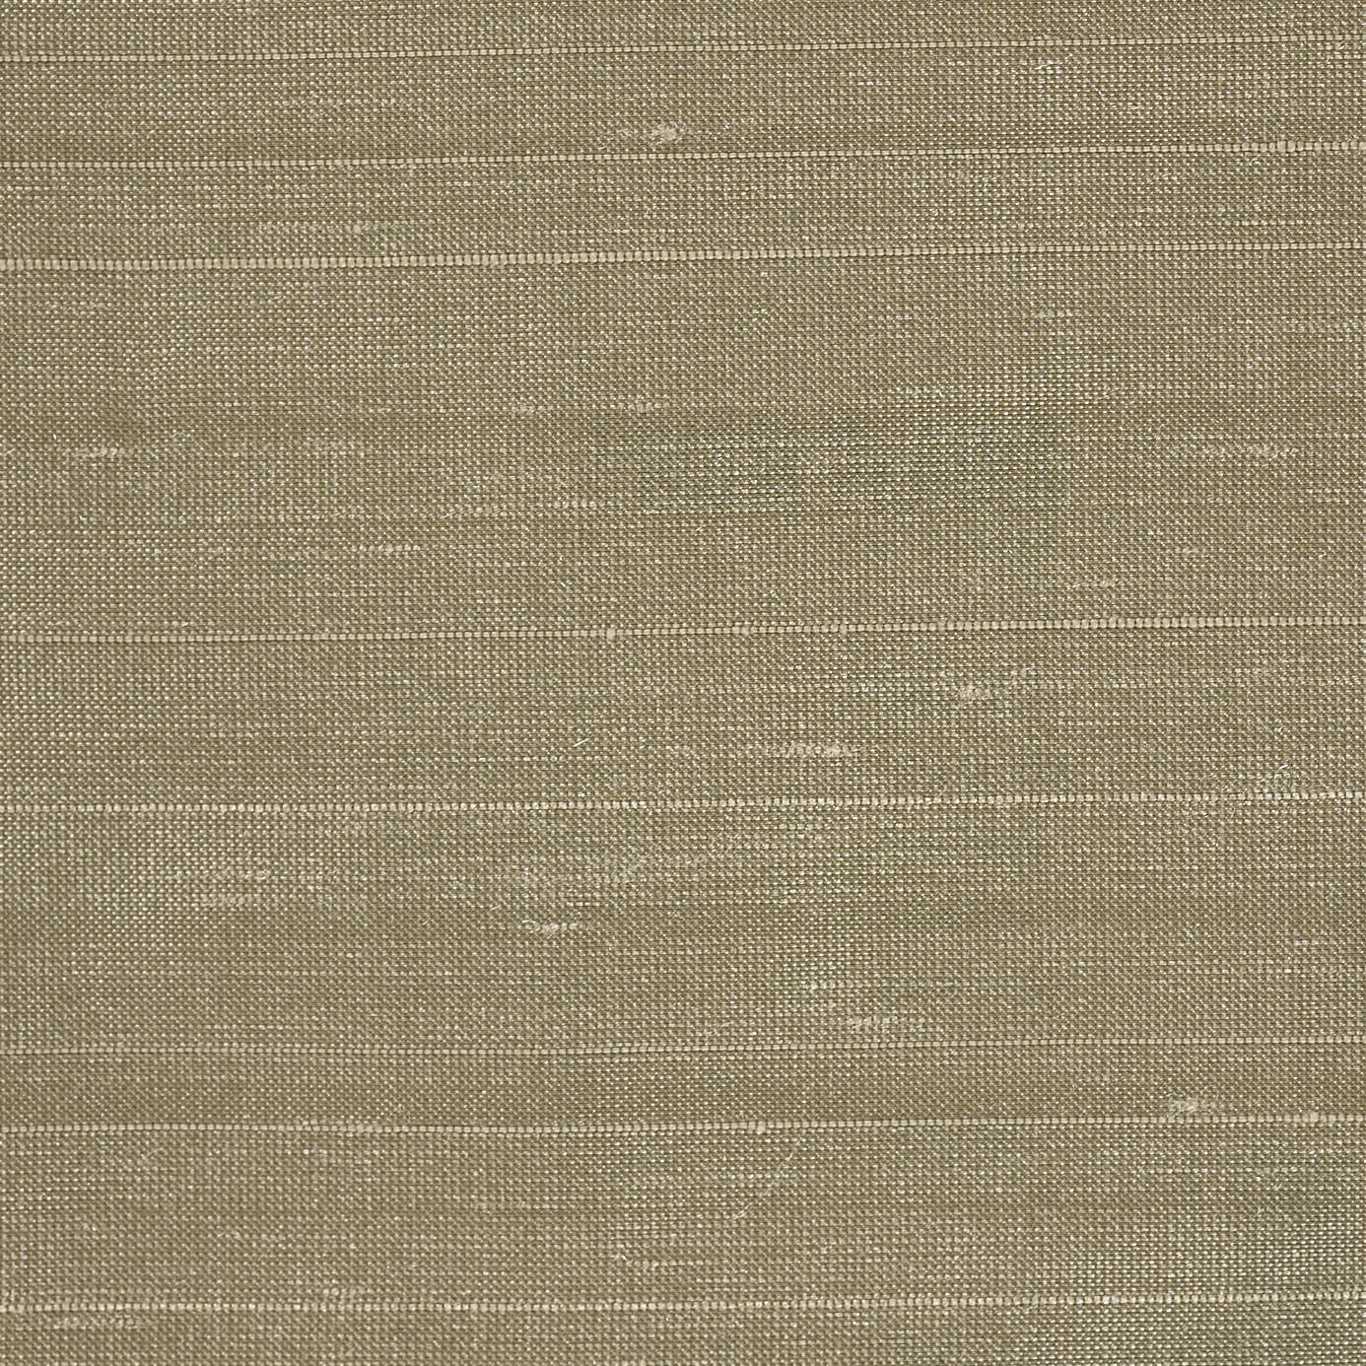 Deflect Fabric by Harlequin - HPOL440700 - Willow